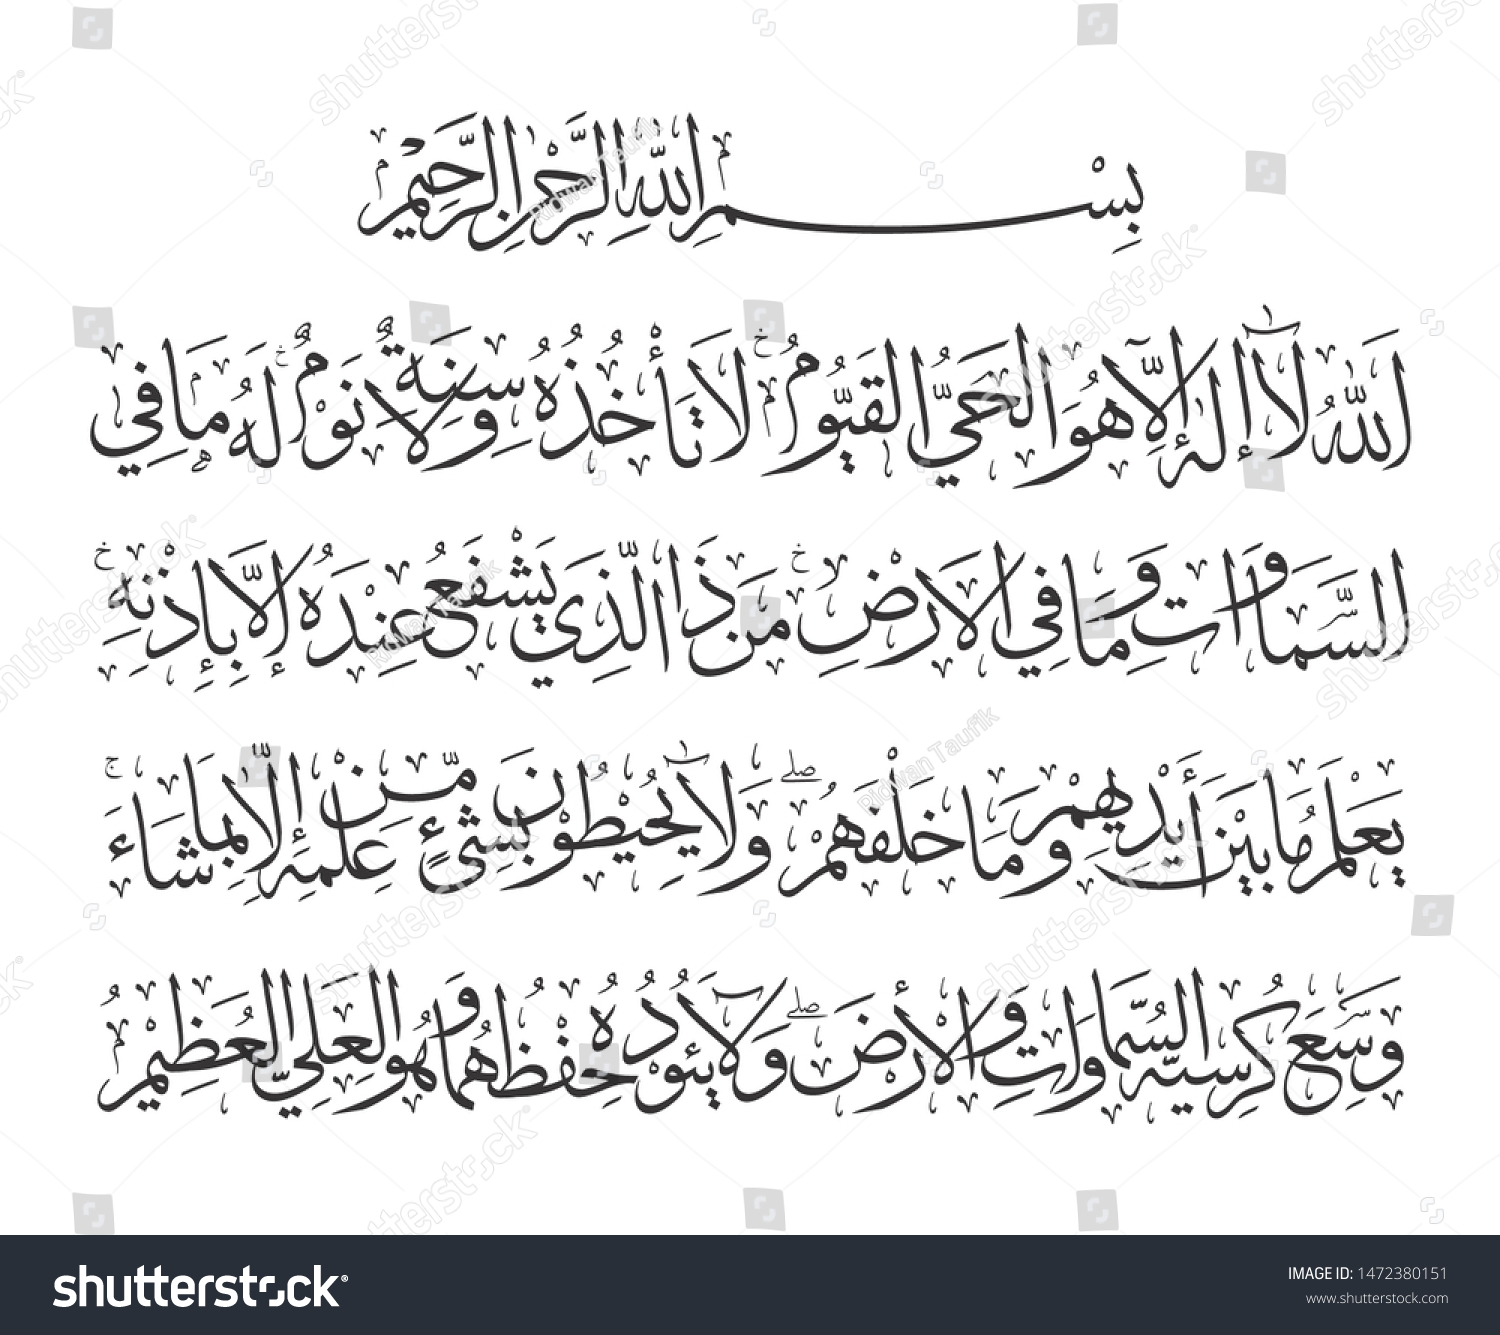 SVG of Ayatul Kursi/Verse of The Throne (Al-Quran Chapter 2/Sura Al-Baqarah verse 255). Muslims usually read the verse after every 5 times prayer and when they seeking for God's protection and help. svg